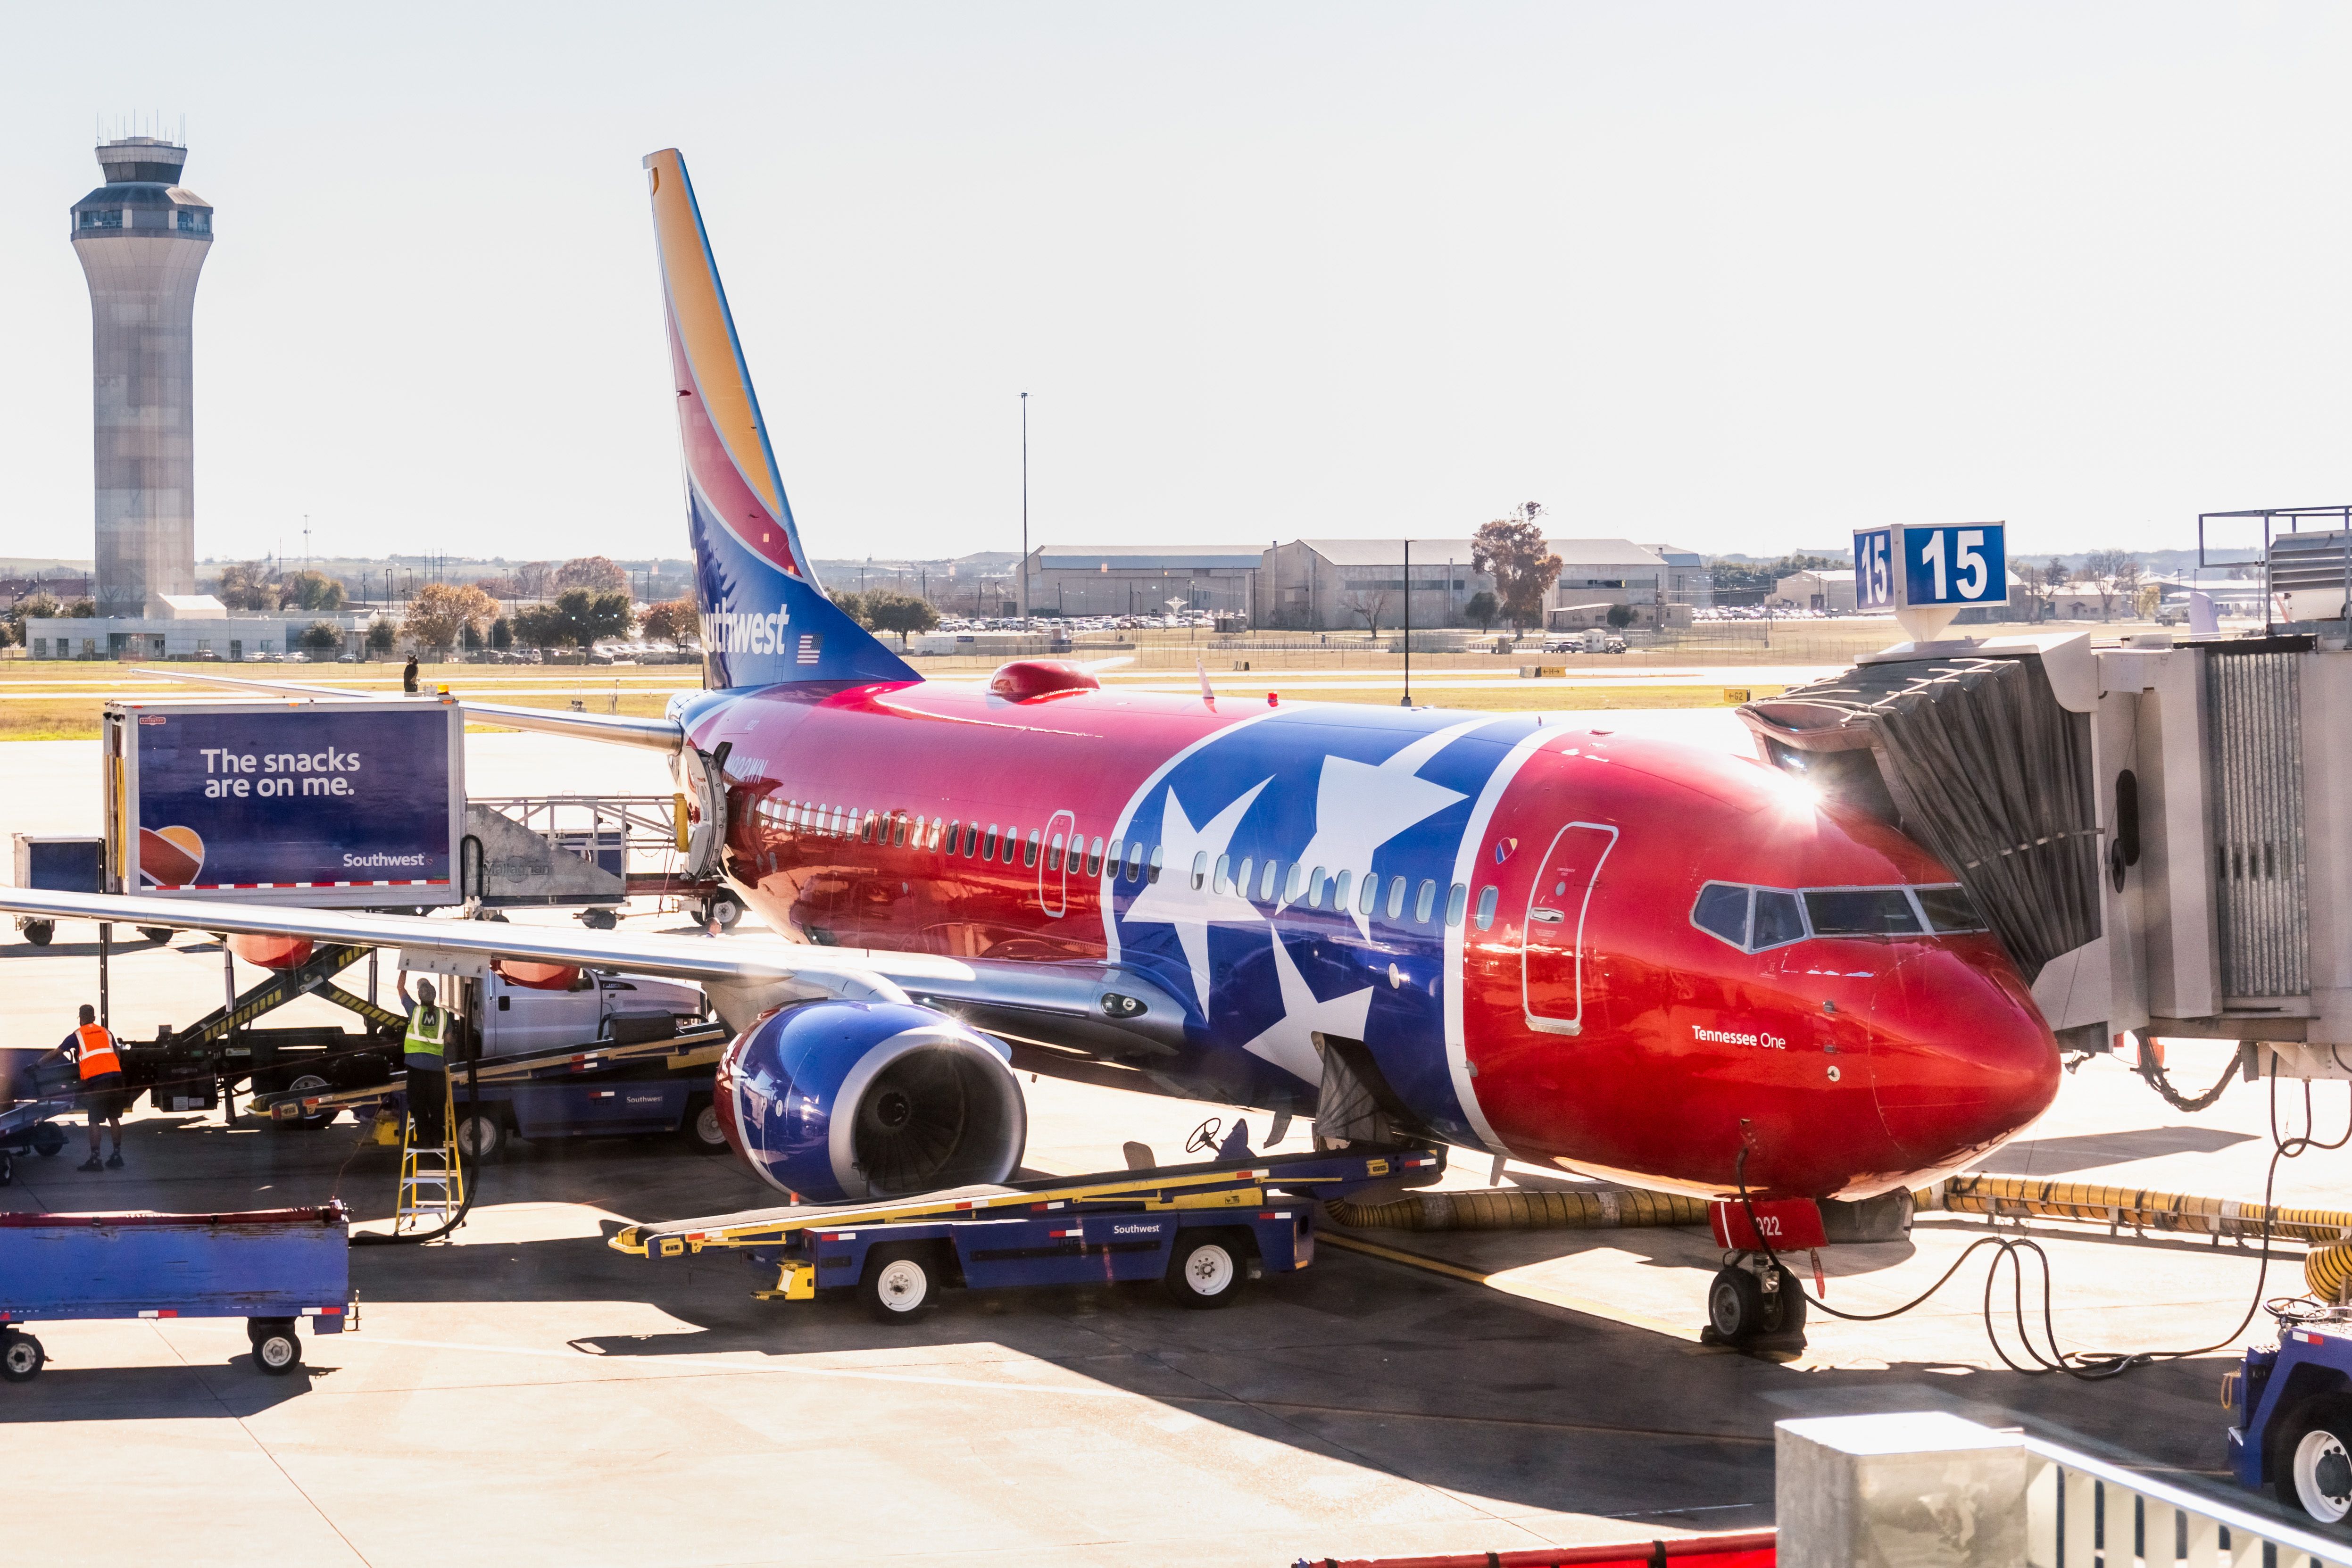 Tennessee One Southwest Airlines aircraft (livery honoring and modeled after the Tennessee state flag) docked at Austin-Bergstrom International Airport